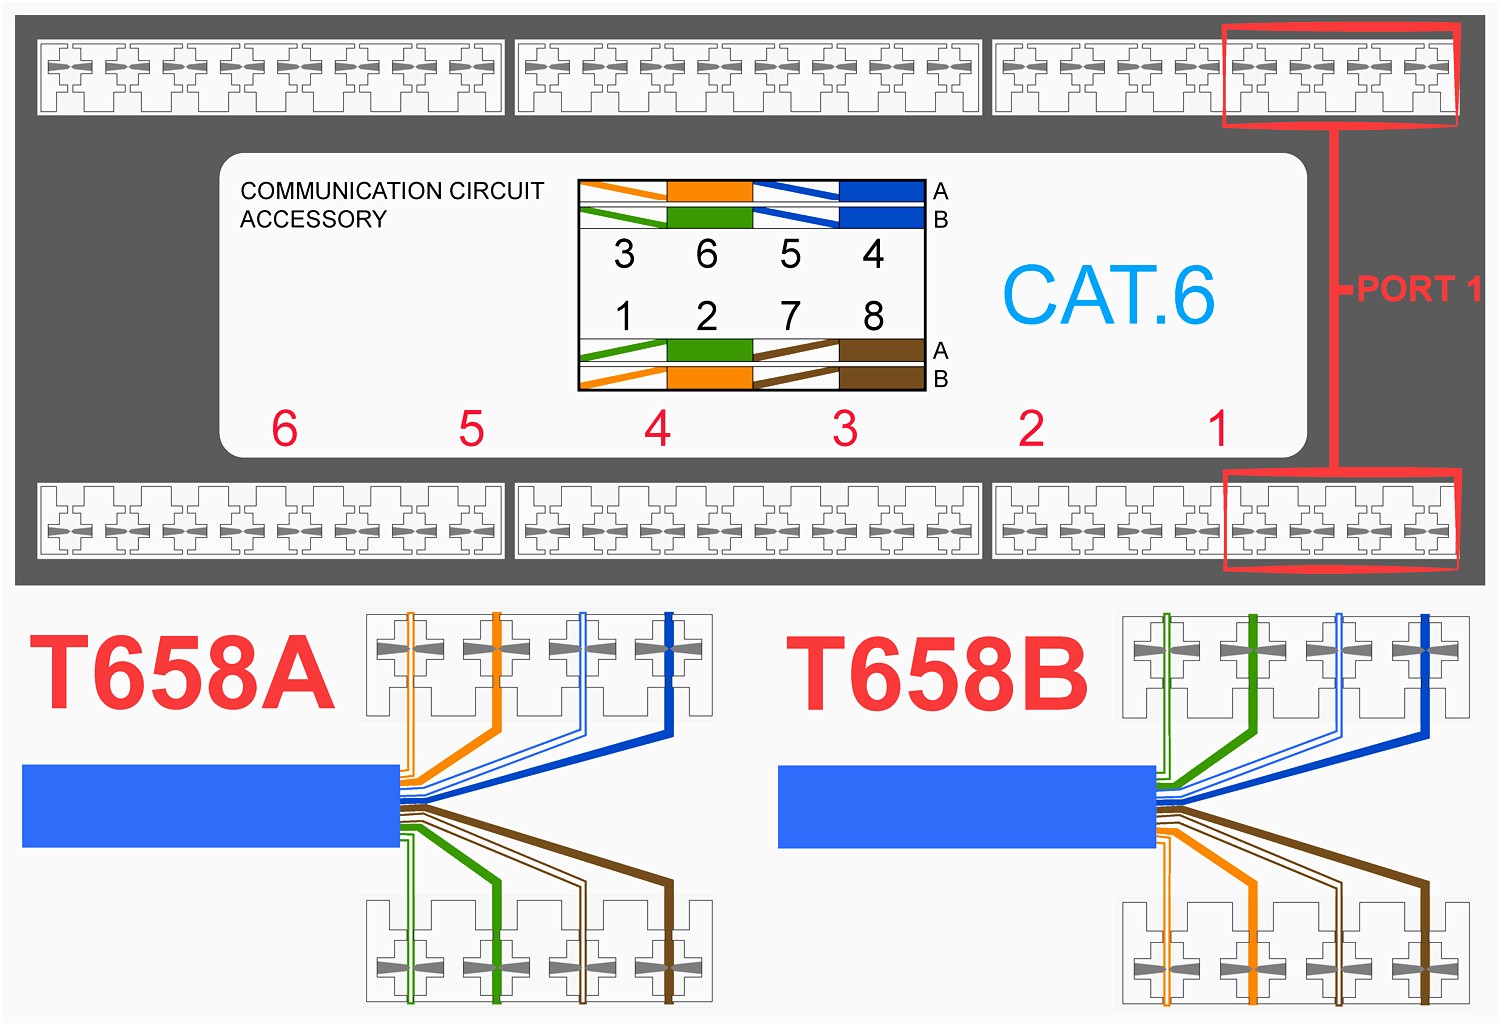 Rj45 Pinout Wiring Diagrams For Cat5e Cat6 Cable In 568b Best B Diagram Cat 6 Wiring Diagram